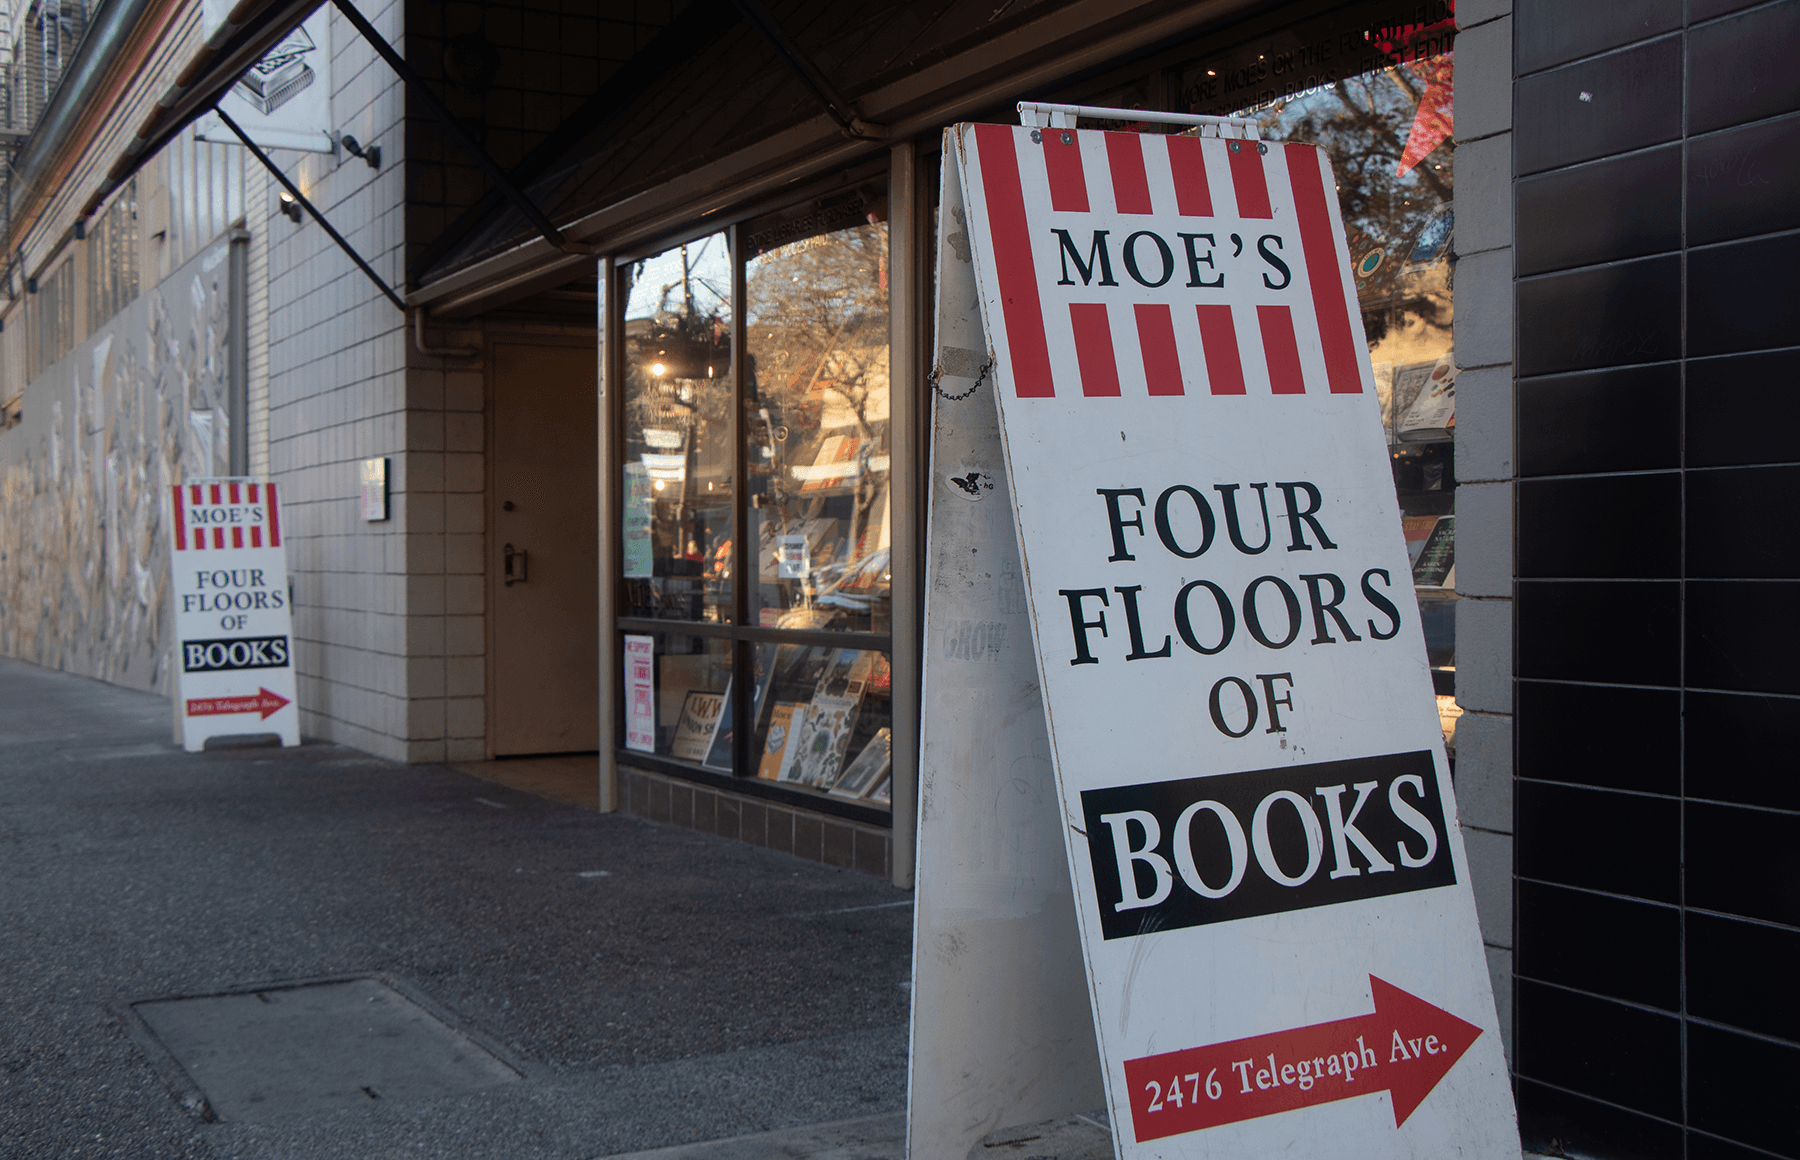 In front of Moe's Book's Telegraph Avenue location, two signs are propped on each side of the storefront. The identical signs have three sections of text. In all capital letters, the first section reads: Moe's. Also in capital letters, the second section reads: four floors of book. In smaller, title case text, the third section reads Moe's address: 2476 Telegraph Ave.